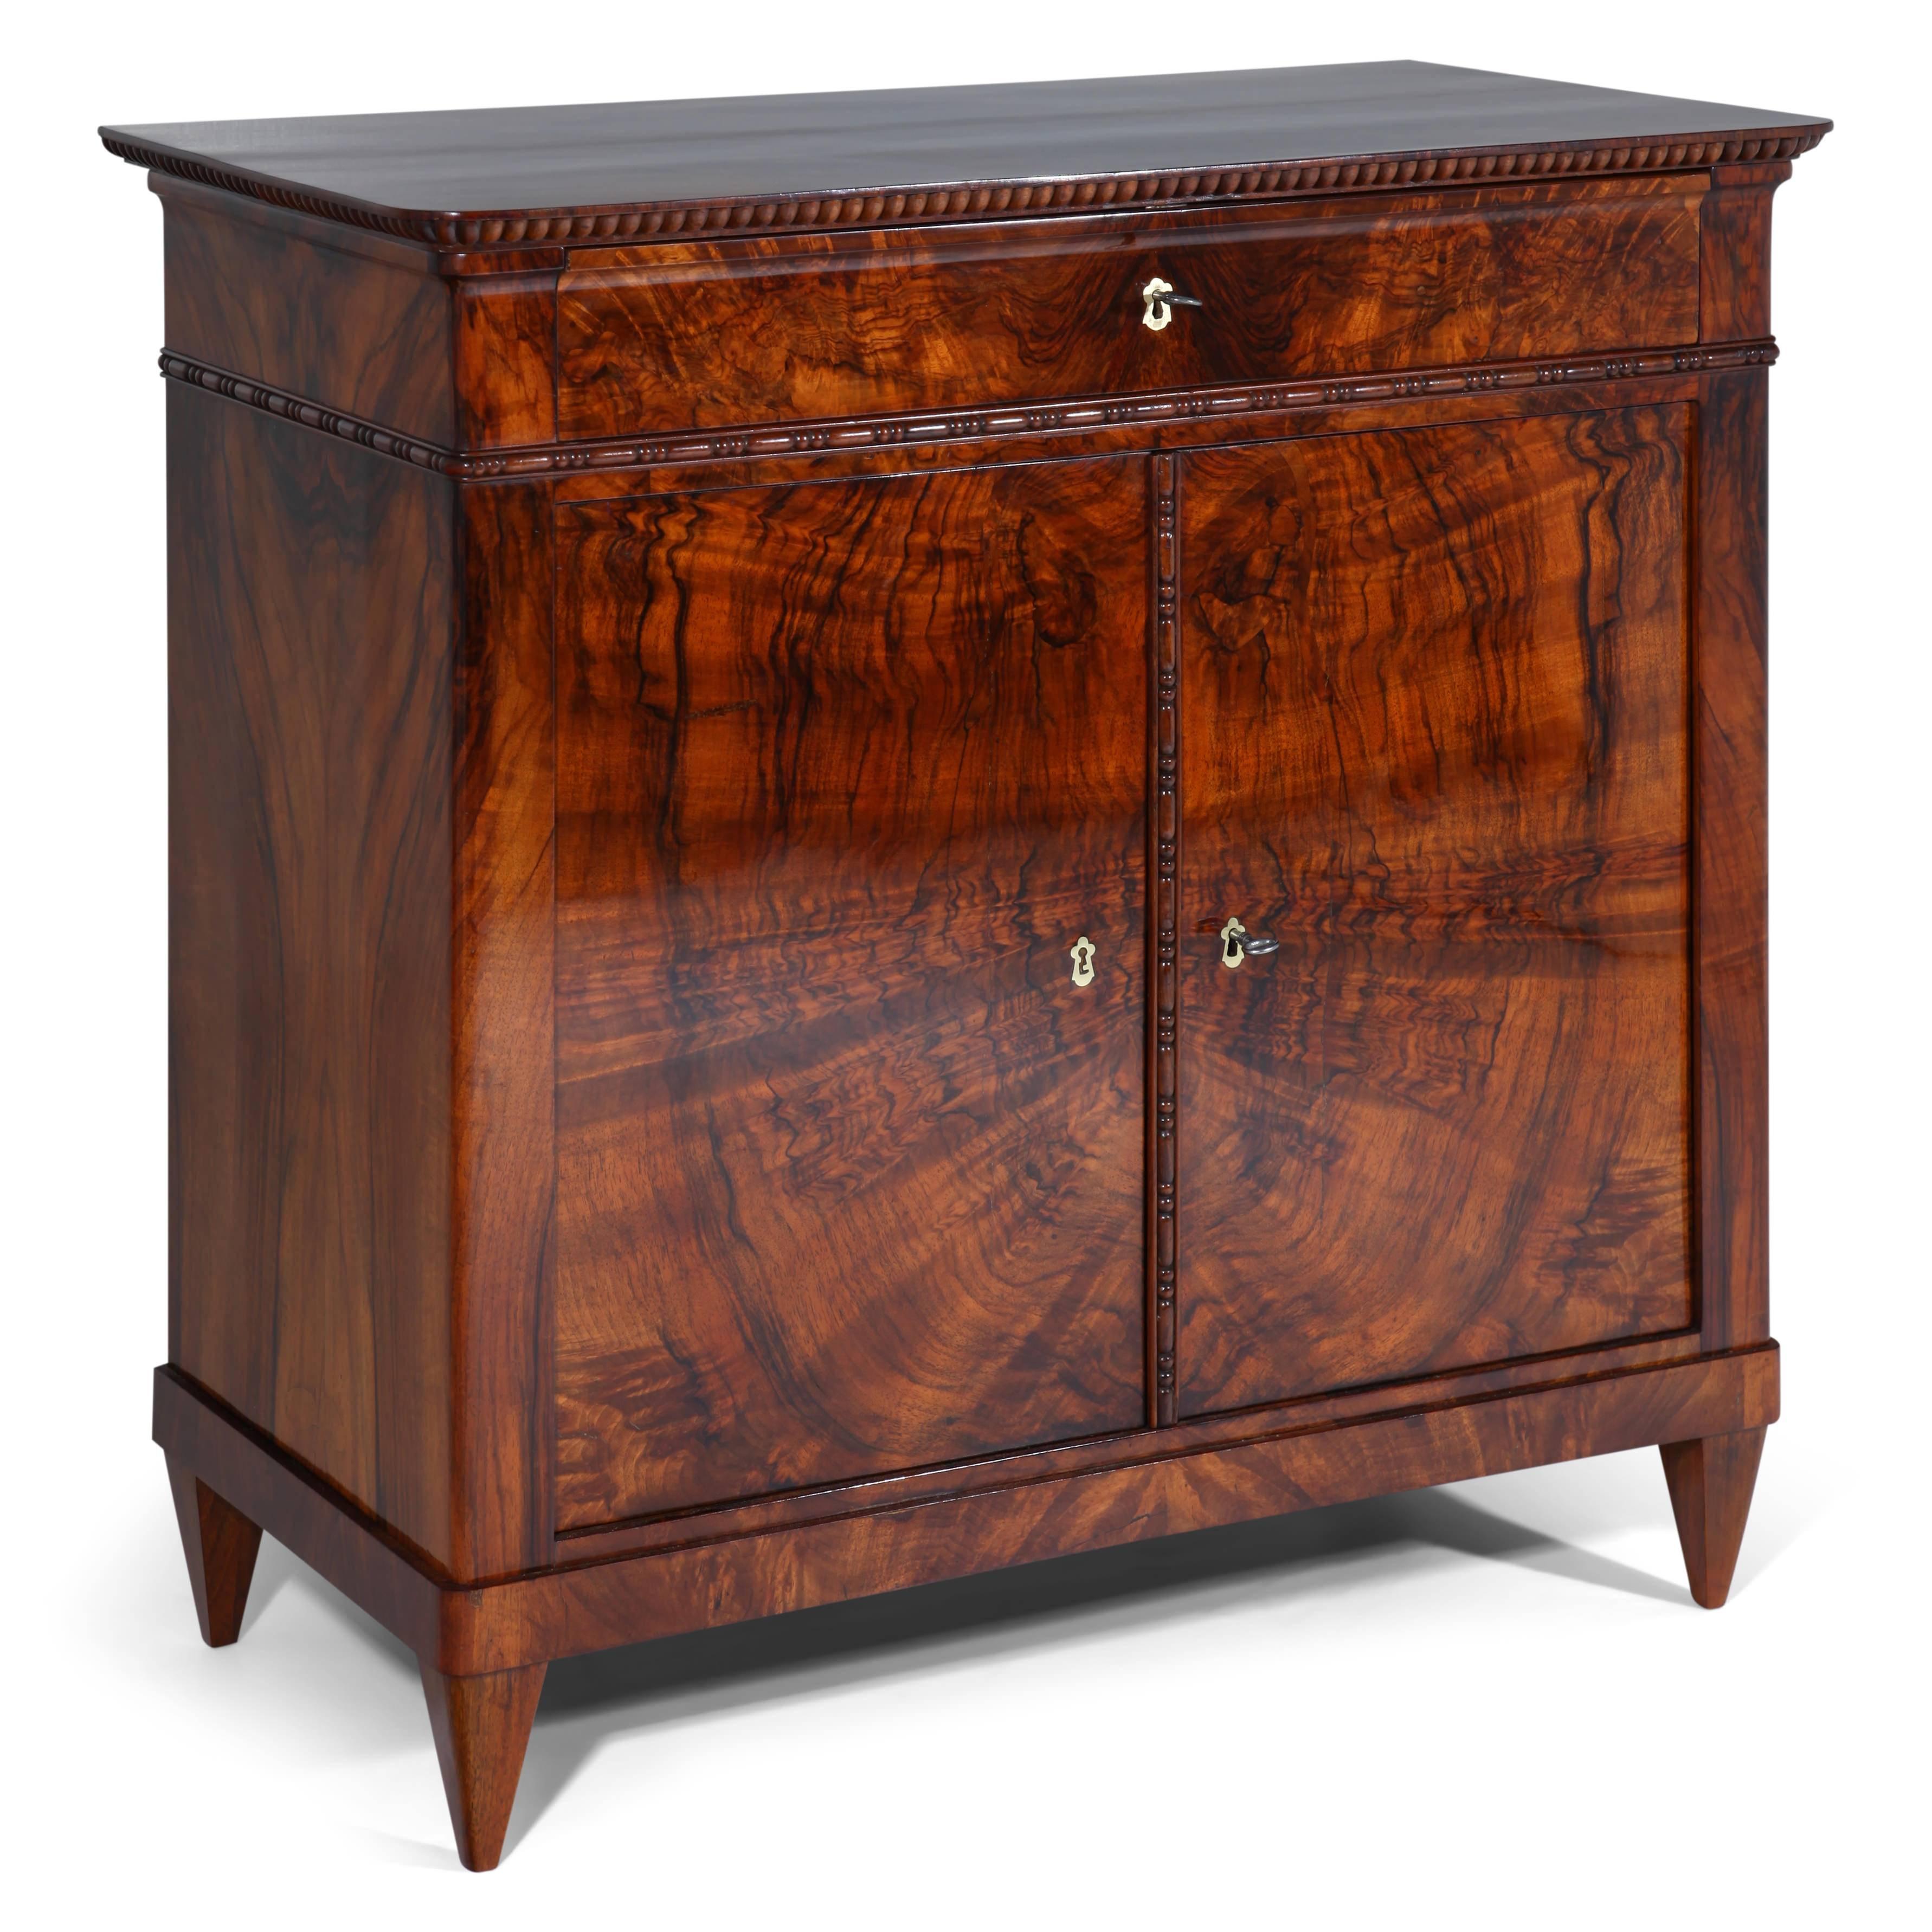 Biedermeier cabinet on tapered feet with two doors and one drawer. The cabinet shows a very beautiful walnut veneer pattern and bead-and-reel moldings.